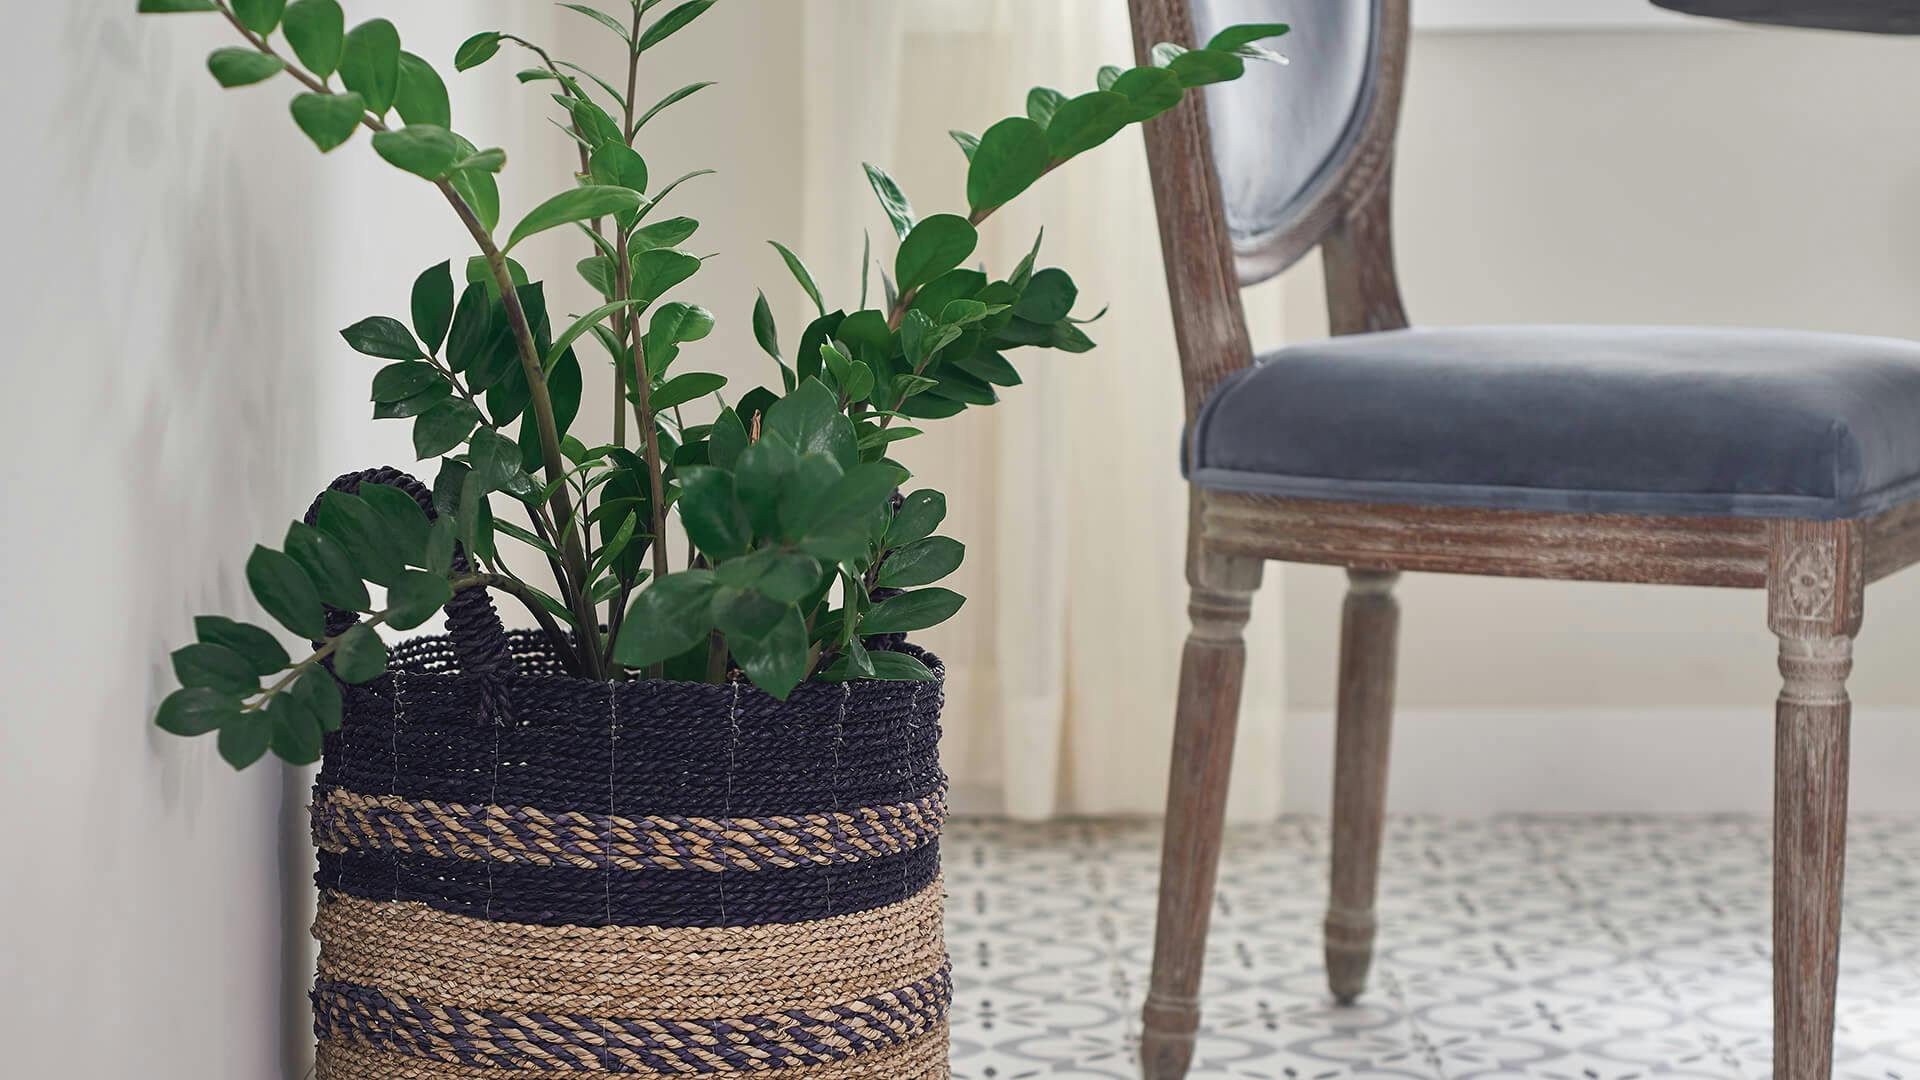 Decorative image of a potted plant inside a dining room with velvet chair in background